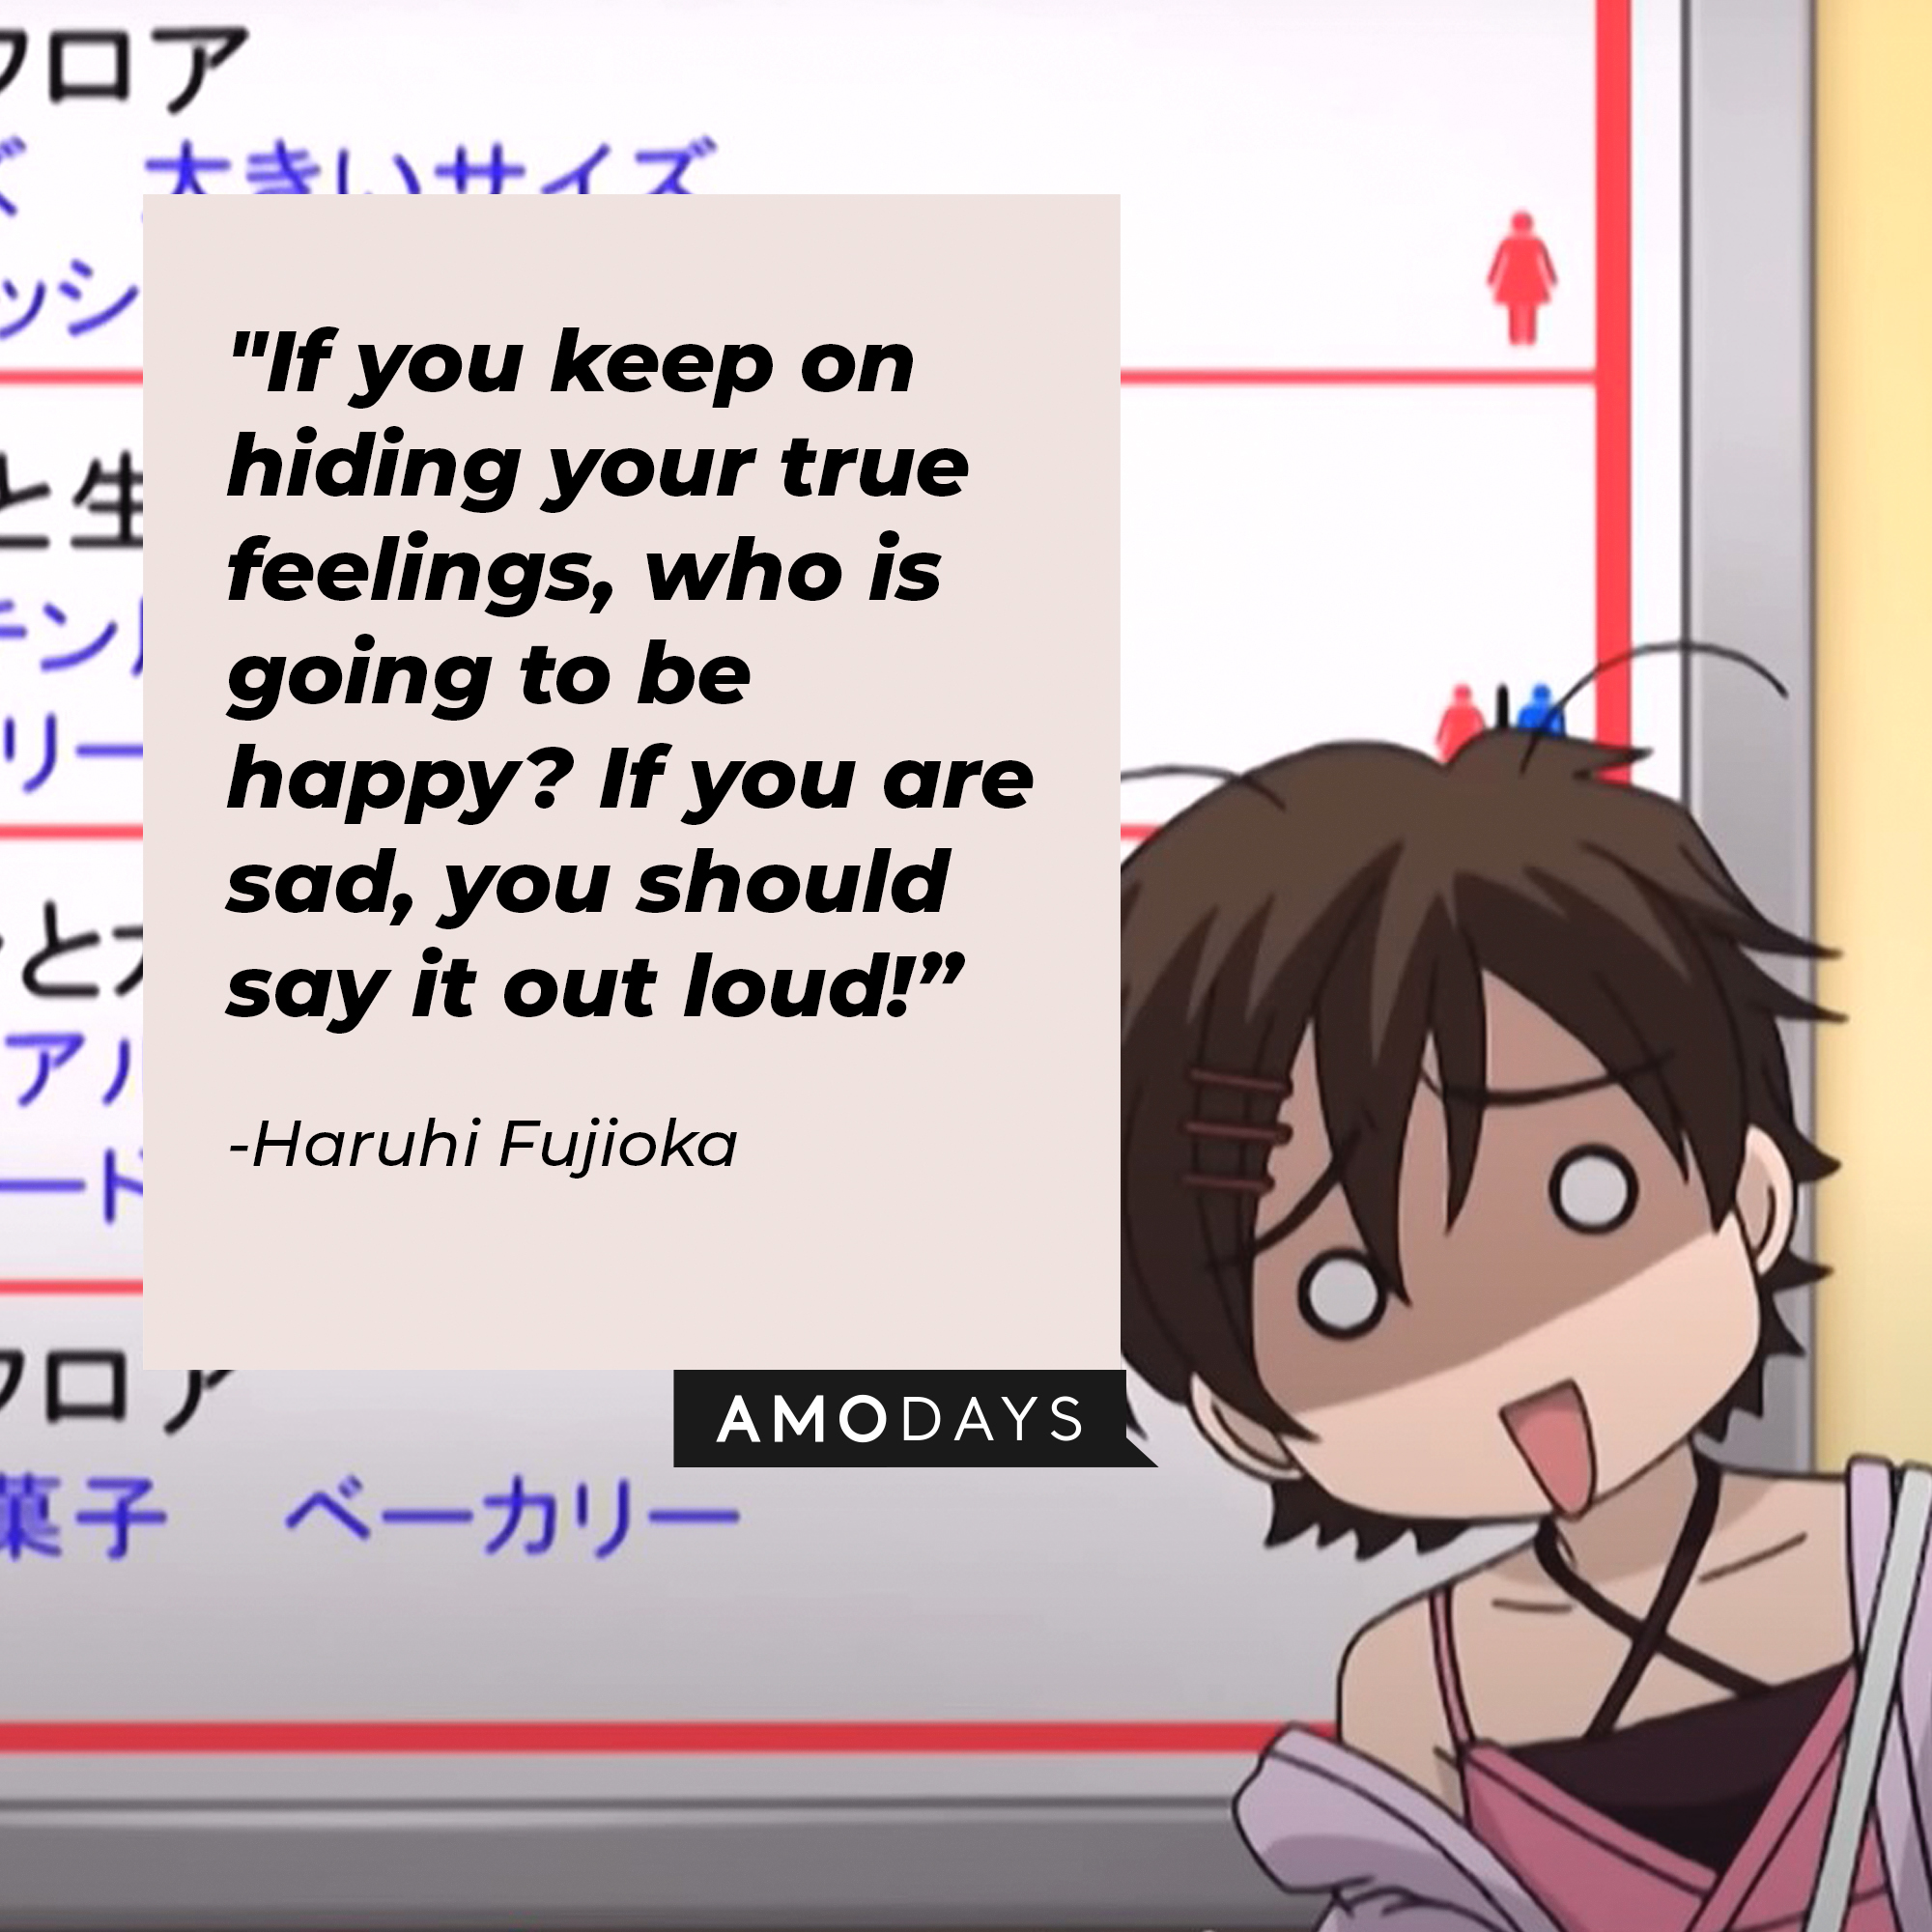 A picture of the anime character Haruhi Fujioka with a quote by her that reads, "If you keep on hiding your true feelings, who is going to be happy? If you are sad, you should say it out loud!” | Image: facebook.com/theouranhostclub